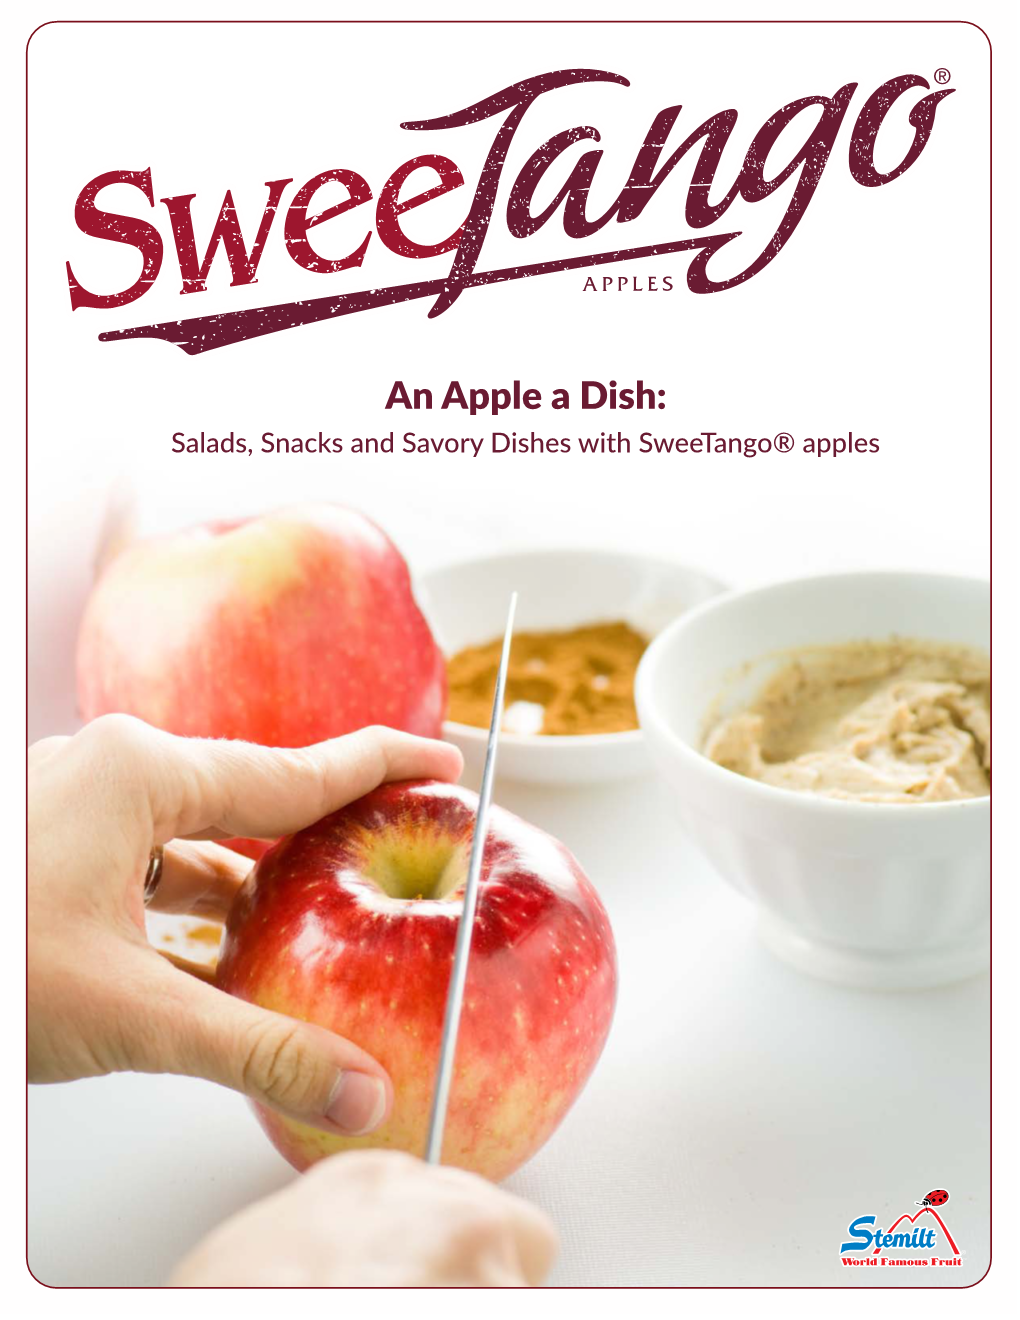 An Apple a Dish: Salads, Snacks and Savory Dishes with Sweetango® Apples Savory Sweetango® Apple & Brie Bites with Rosemary